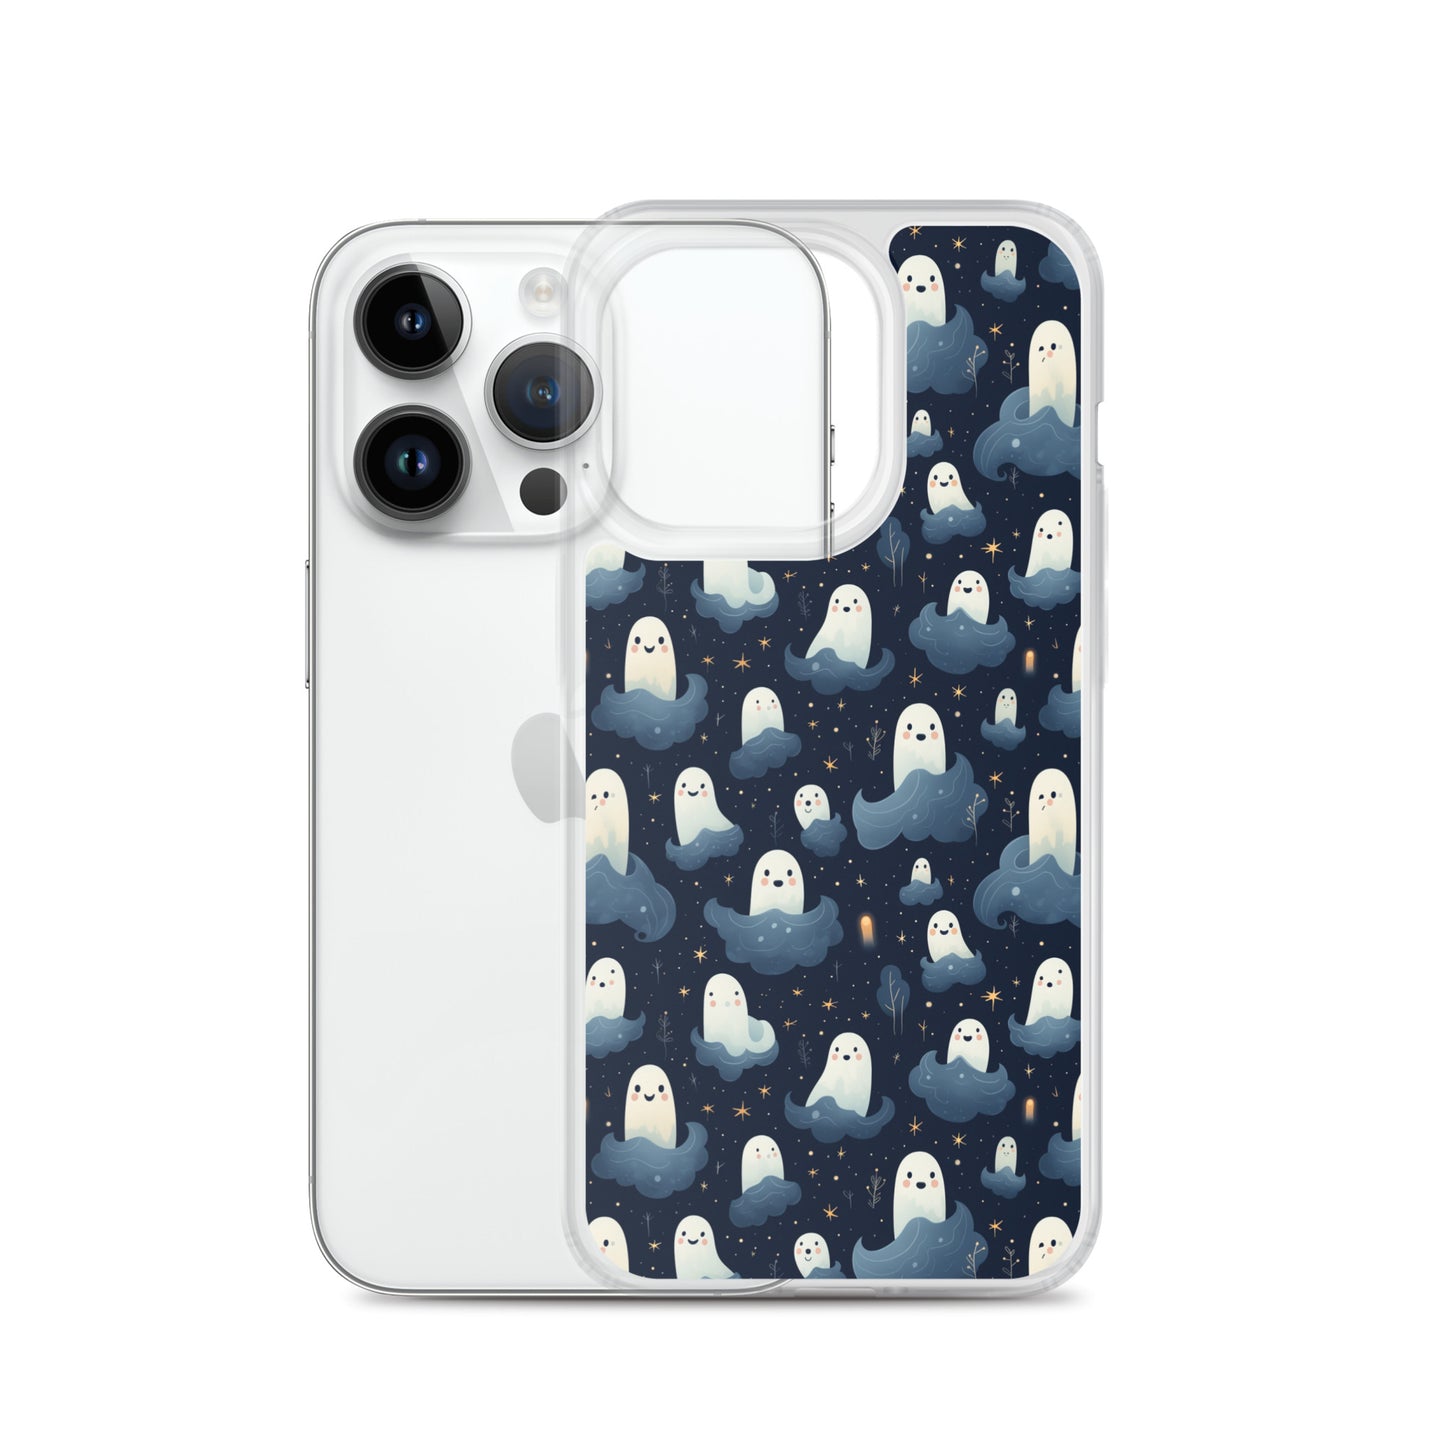 iPhone Case - Friendly Ghosts